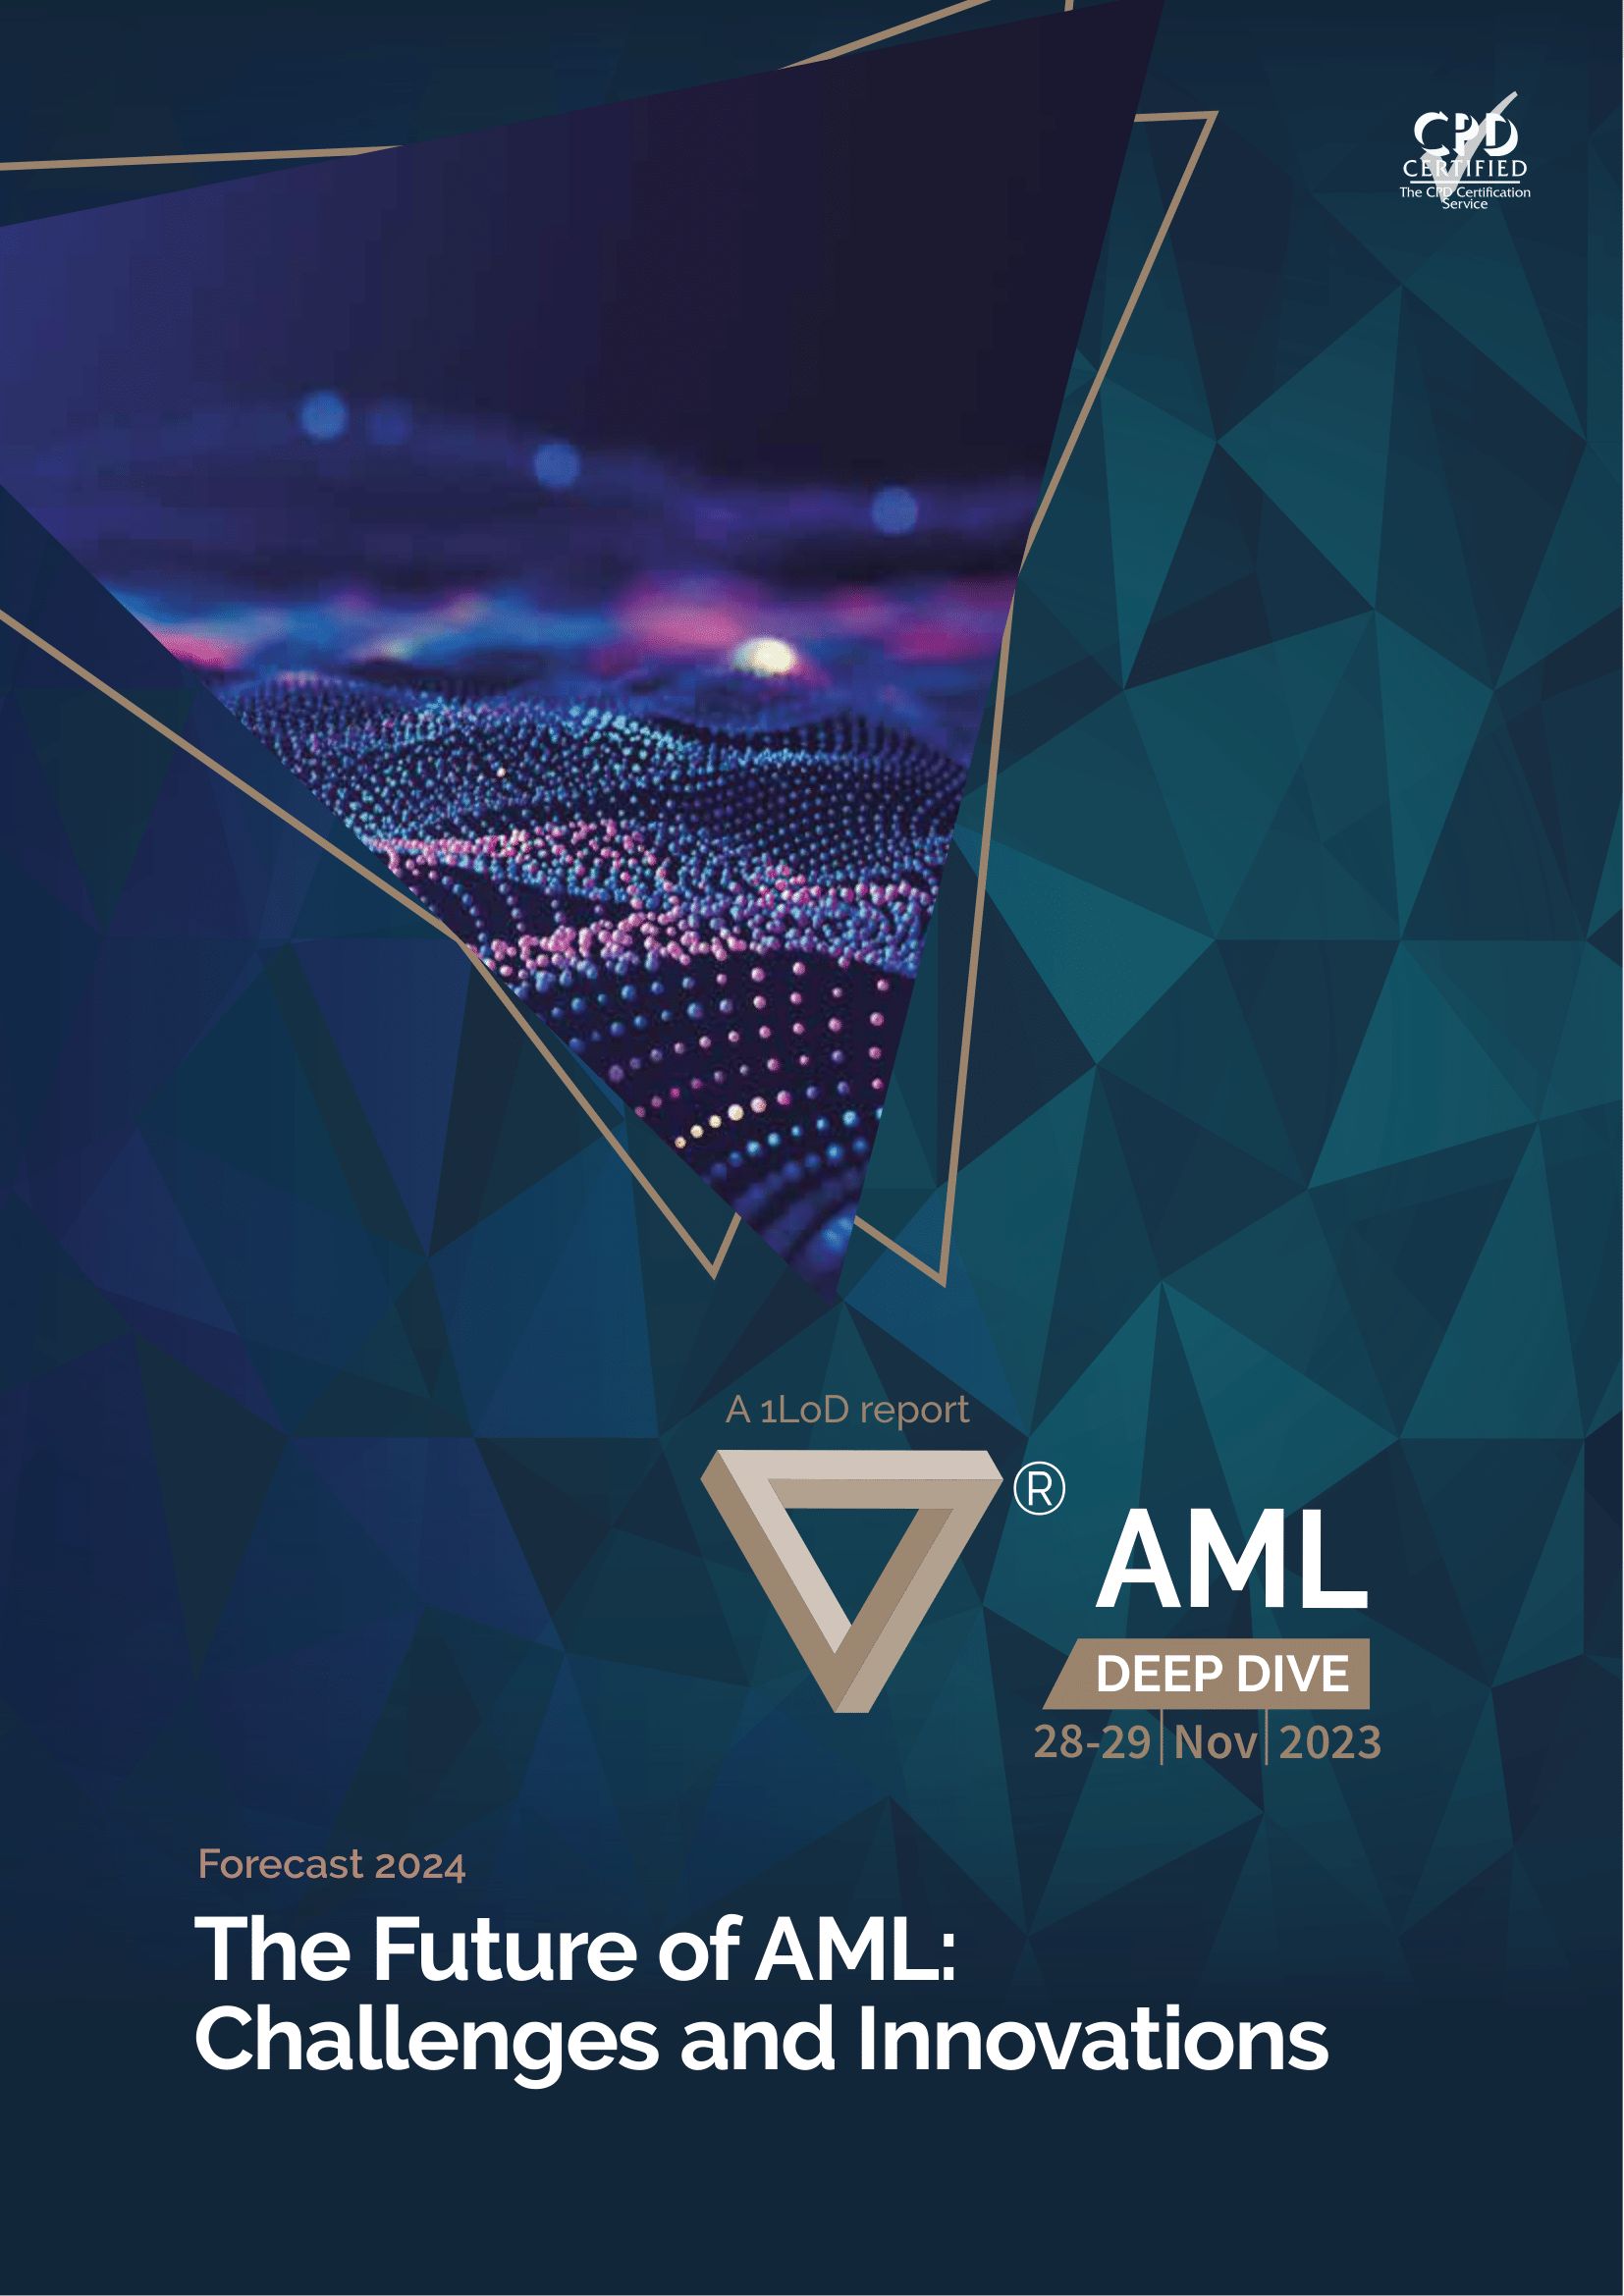 The Future of AML: Challenges and Innovations